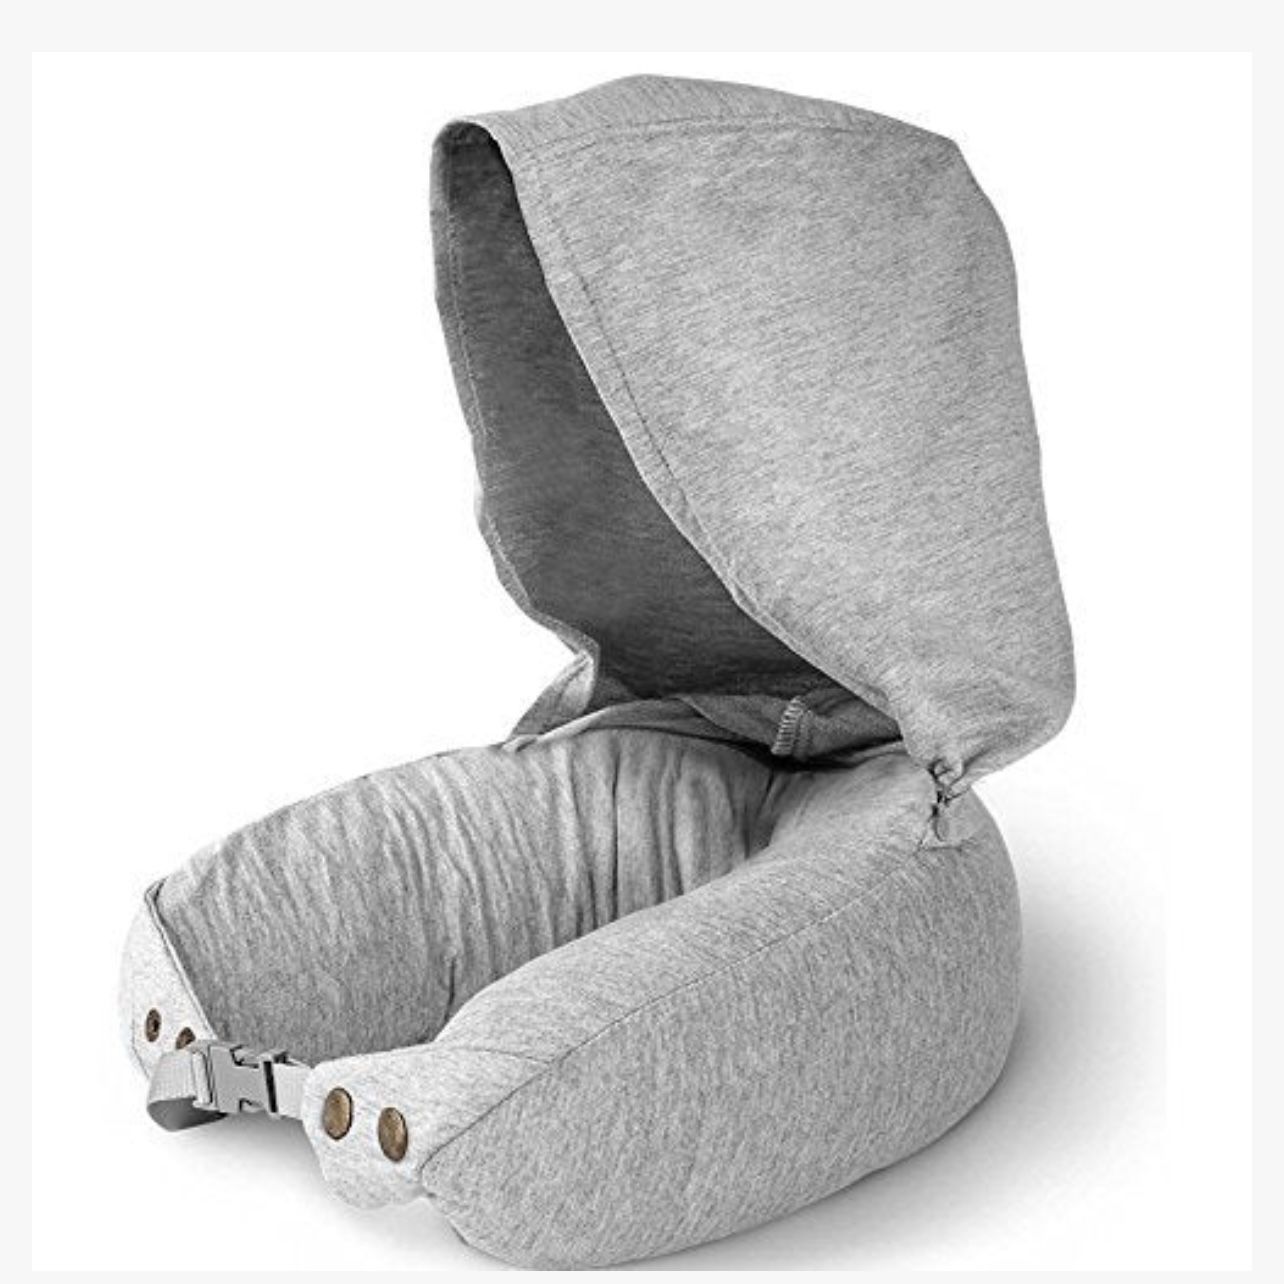 Natural Latex Travel Pillow for Airplanes -Neck Support Travel Pillow with Ultra